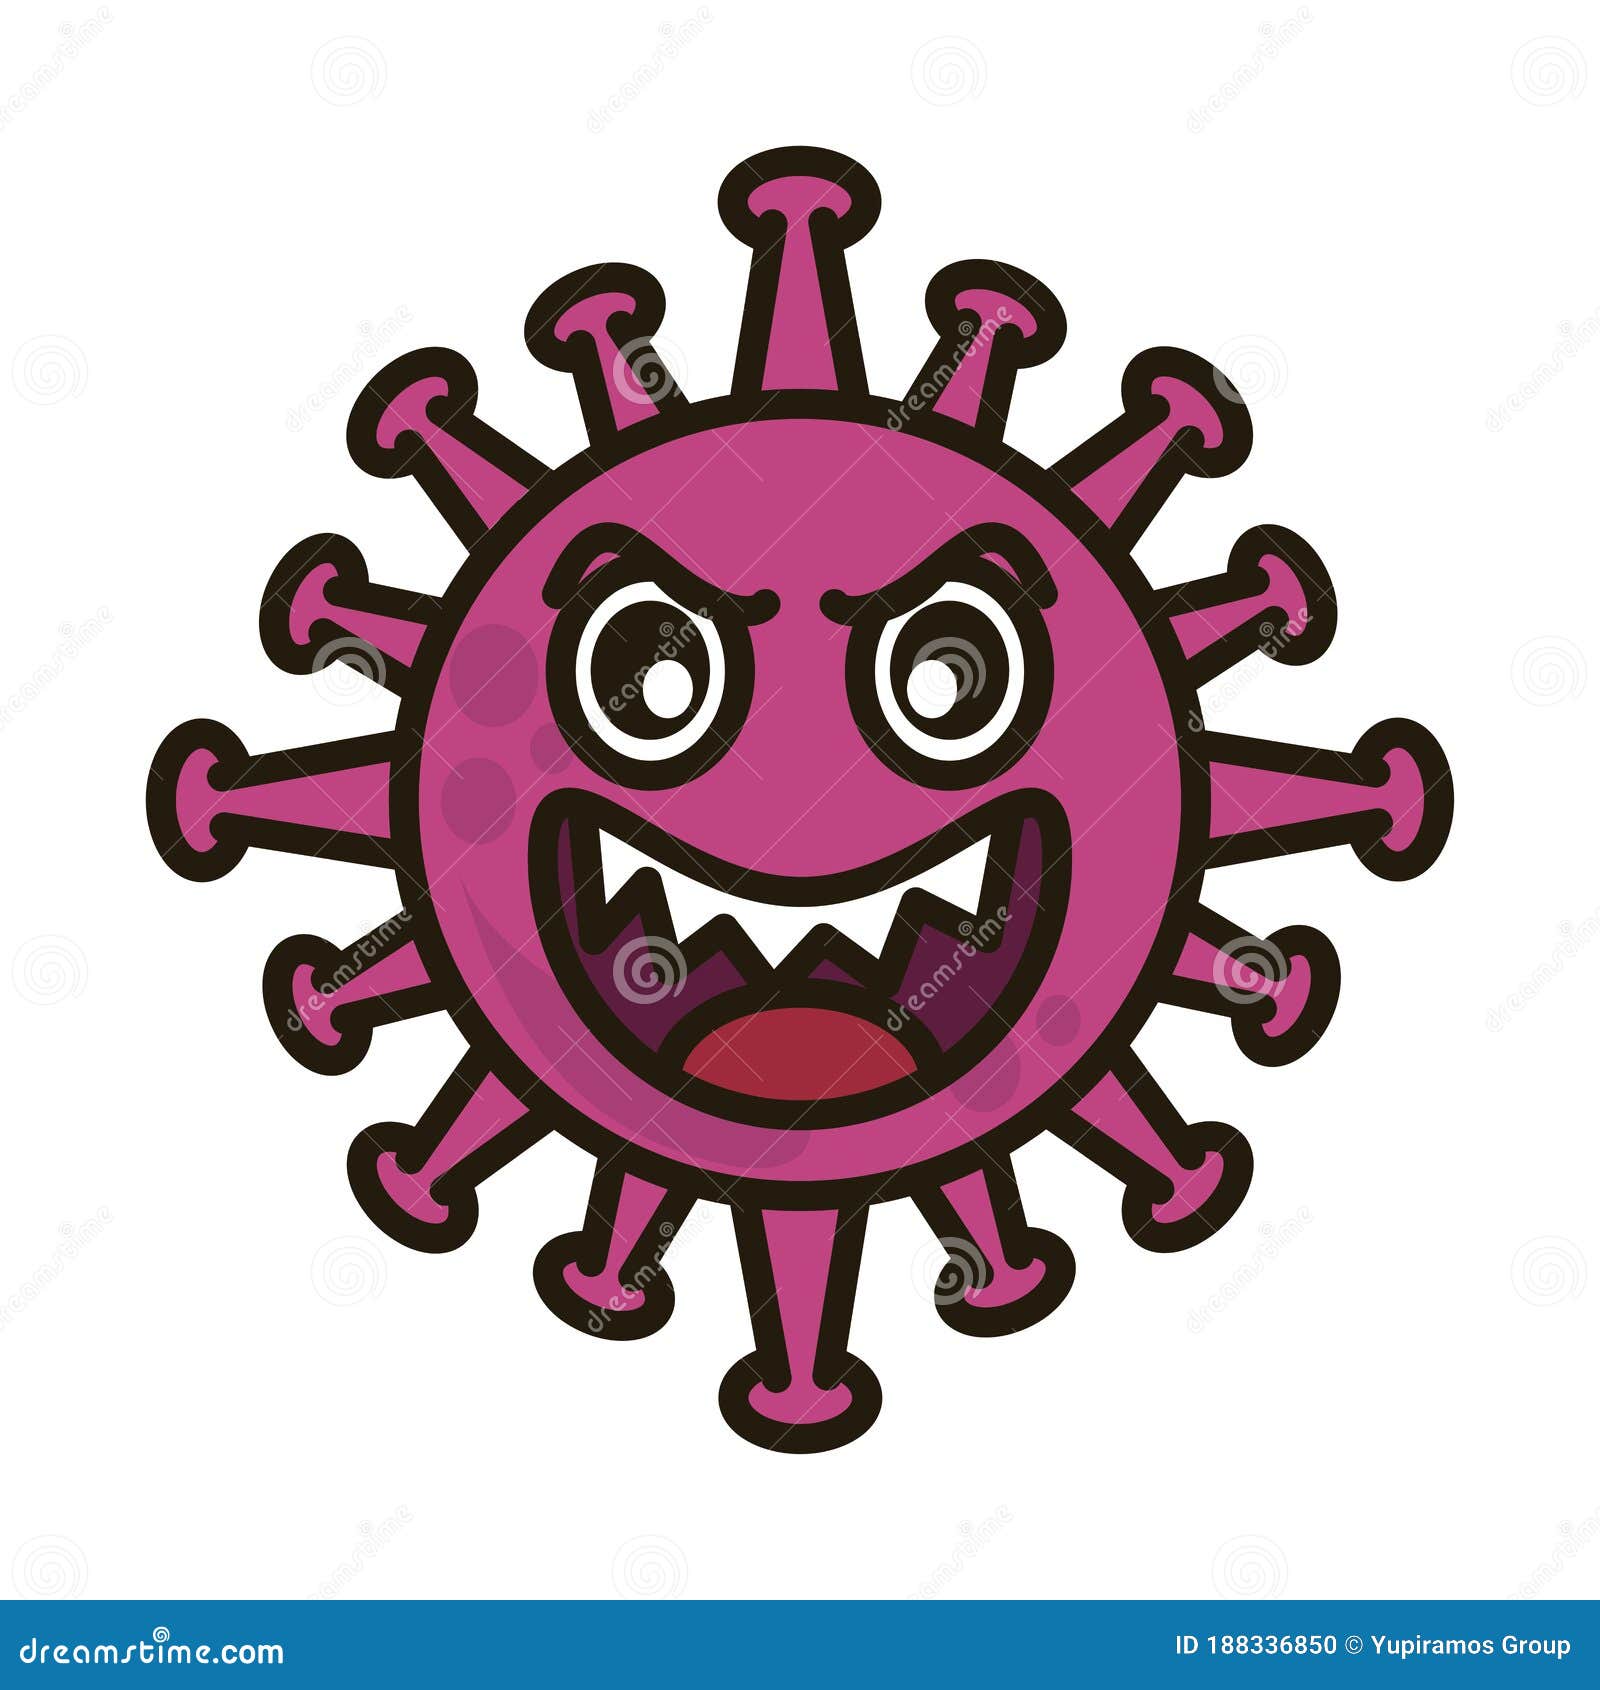 Virus Emoticon, Covid-19 Emoji Character Infection, Angry Face, Flat